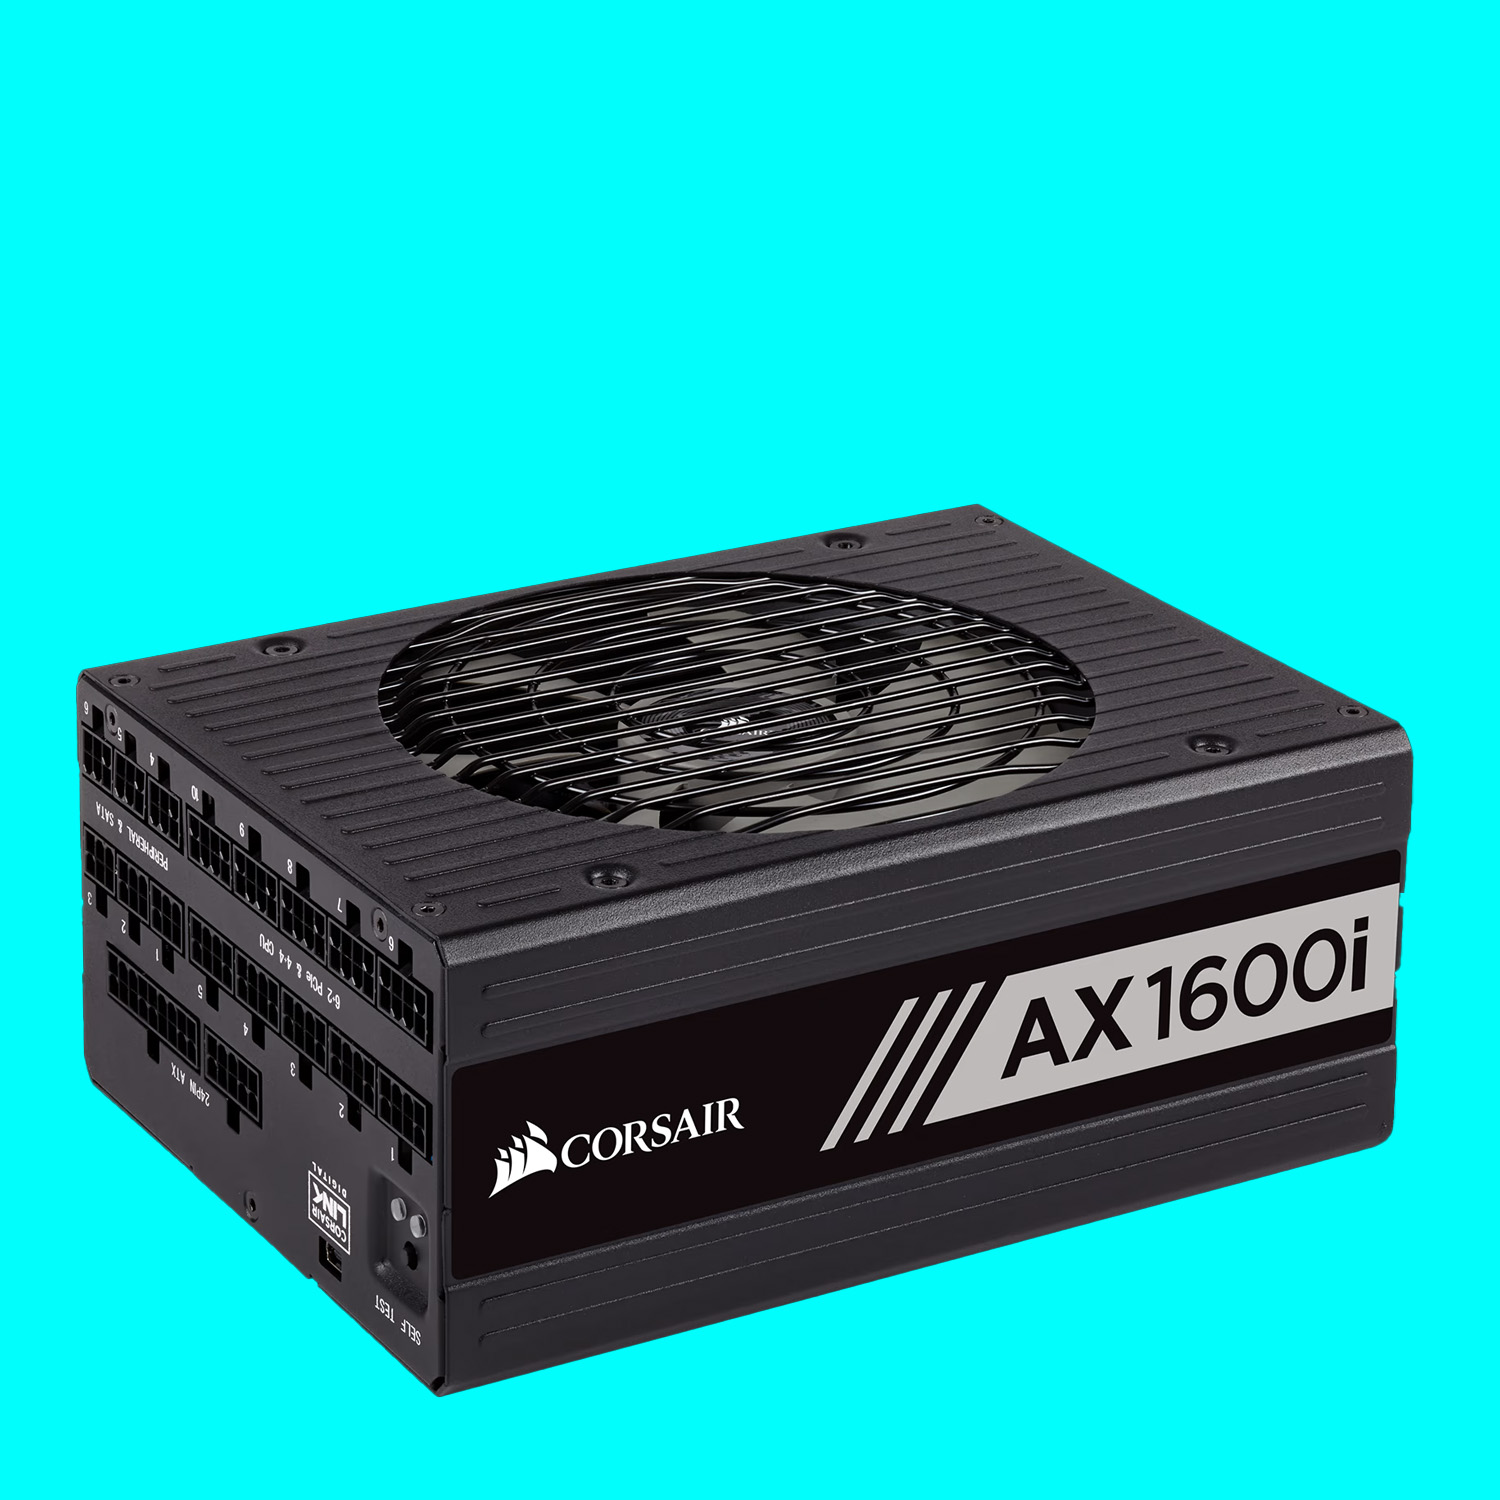 The best PSUs on different coloured backgrounds.